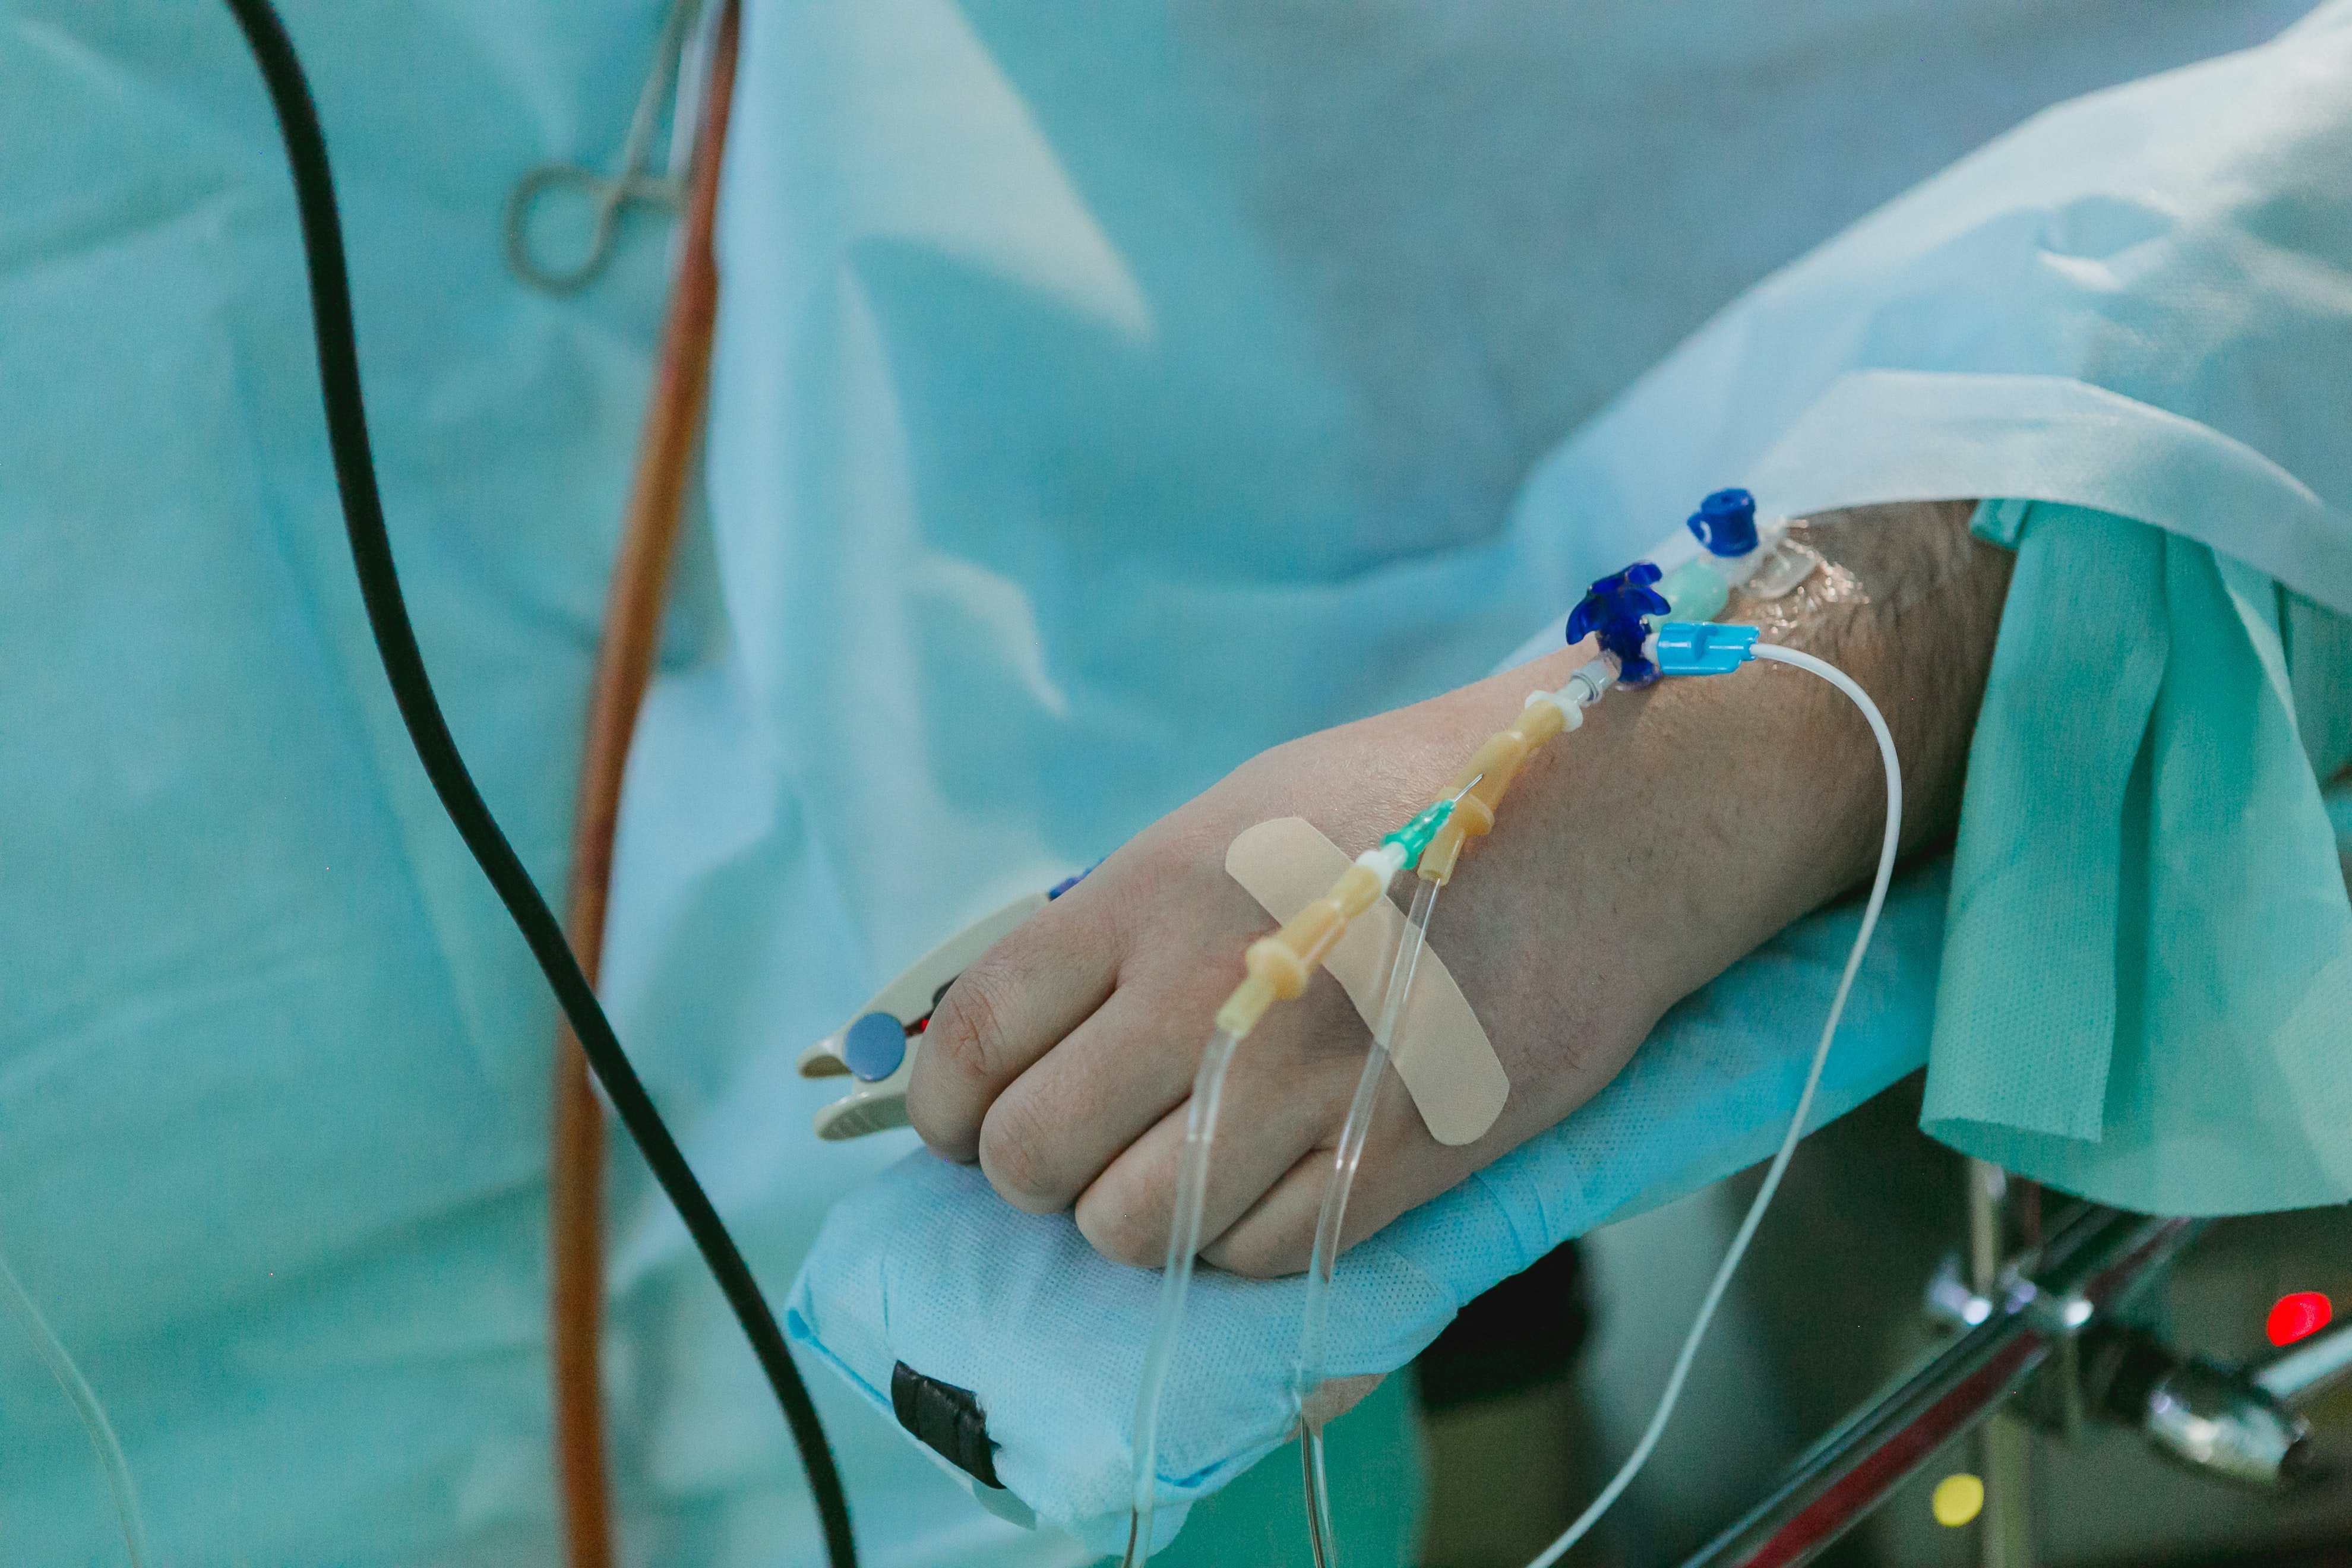 The old man was hospitalized | Photo: Pexels